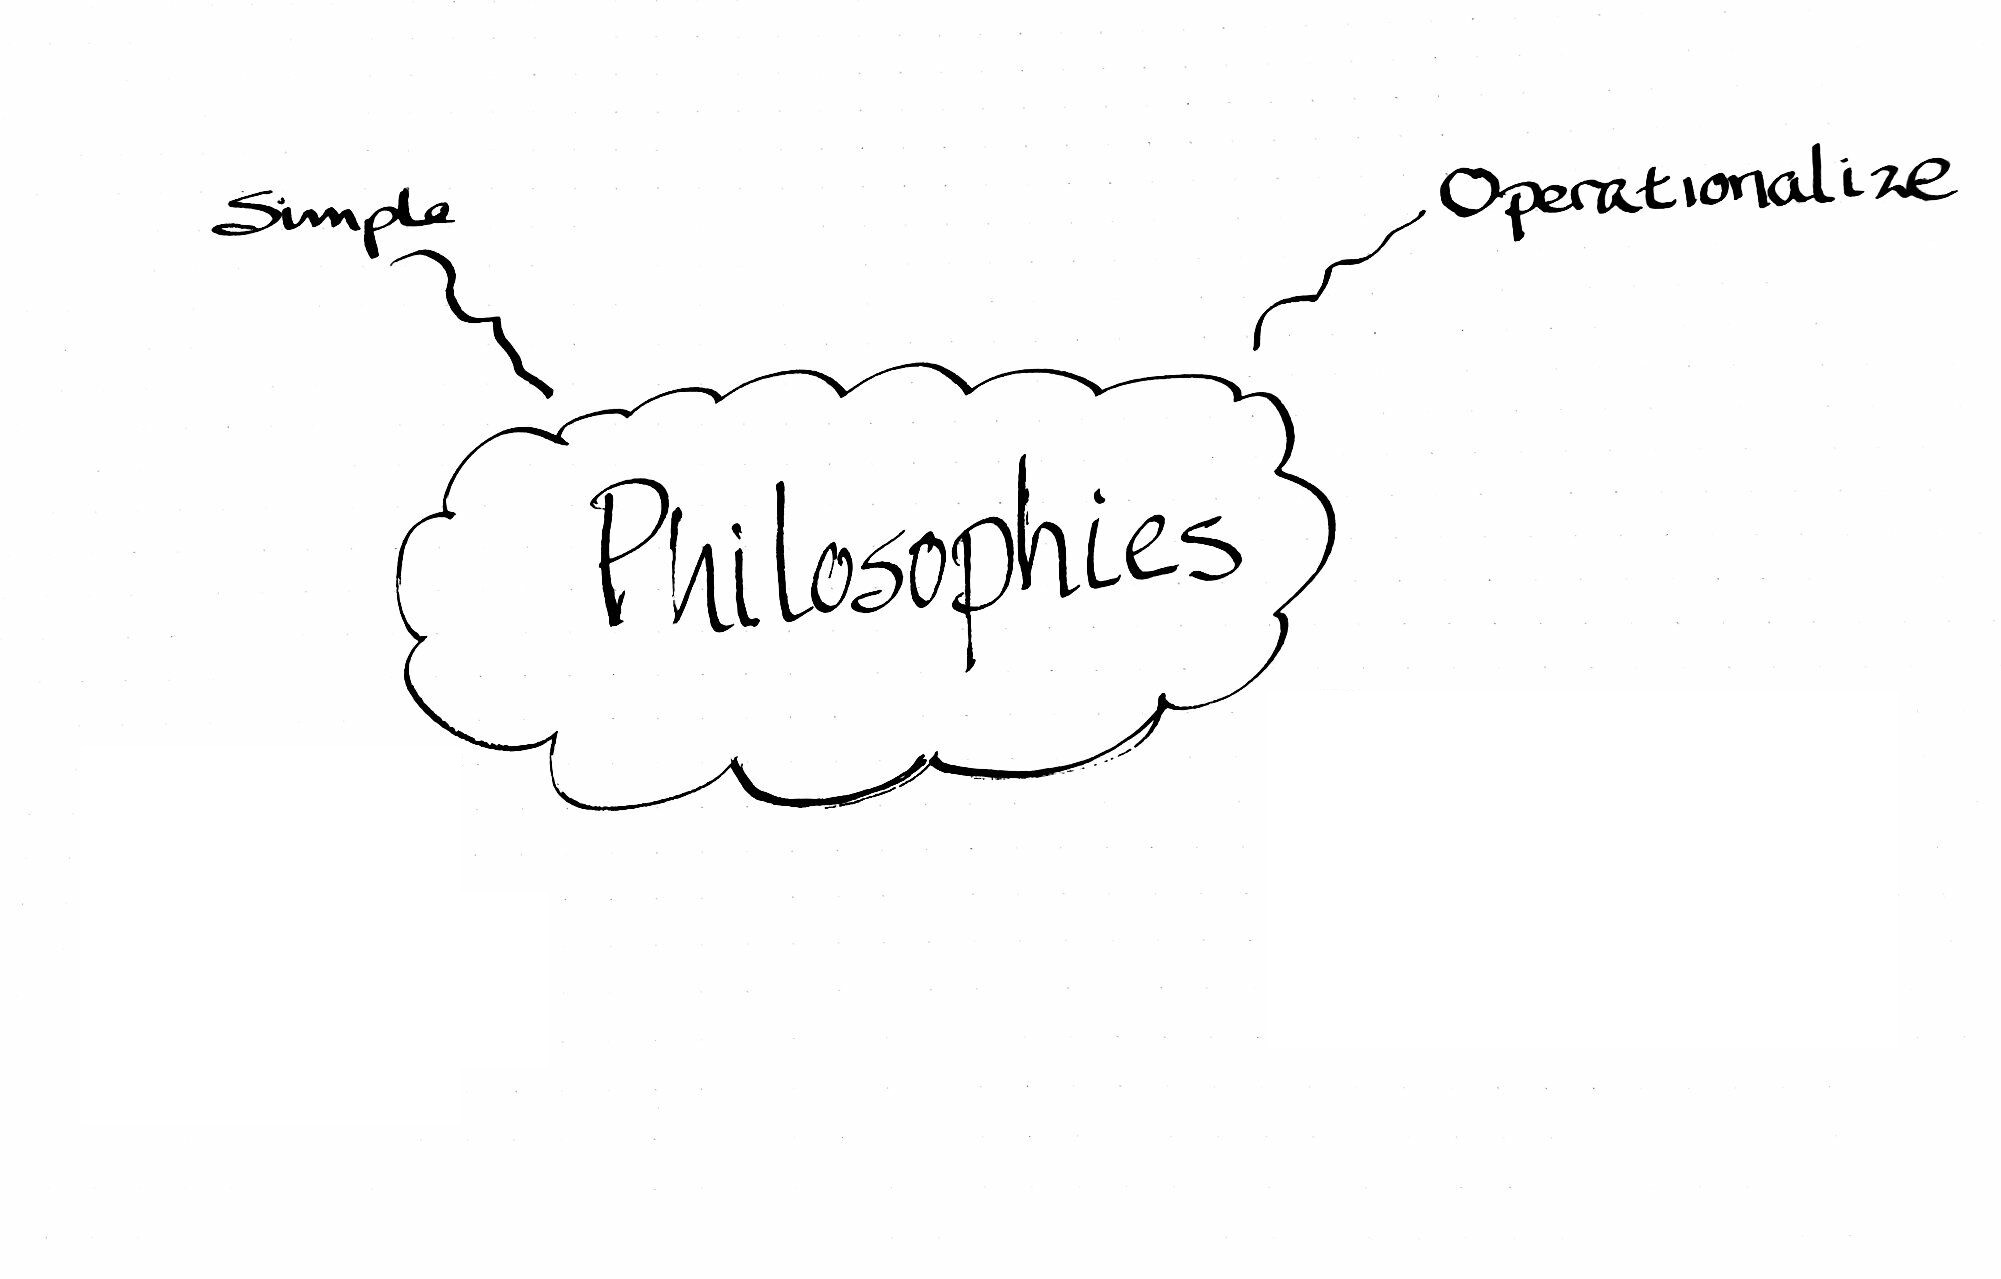 06-22-philosophies-operationalize.md